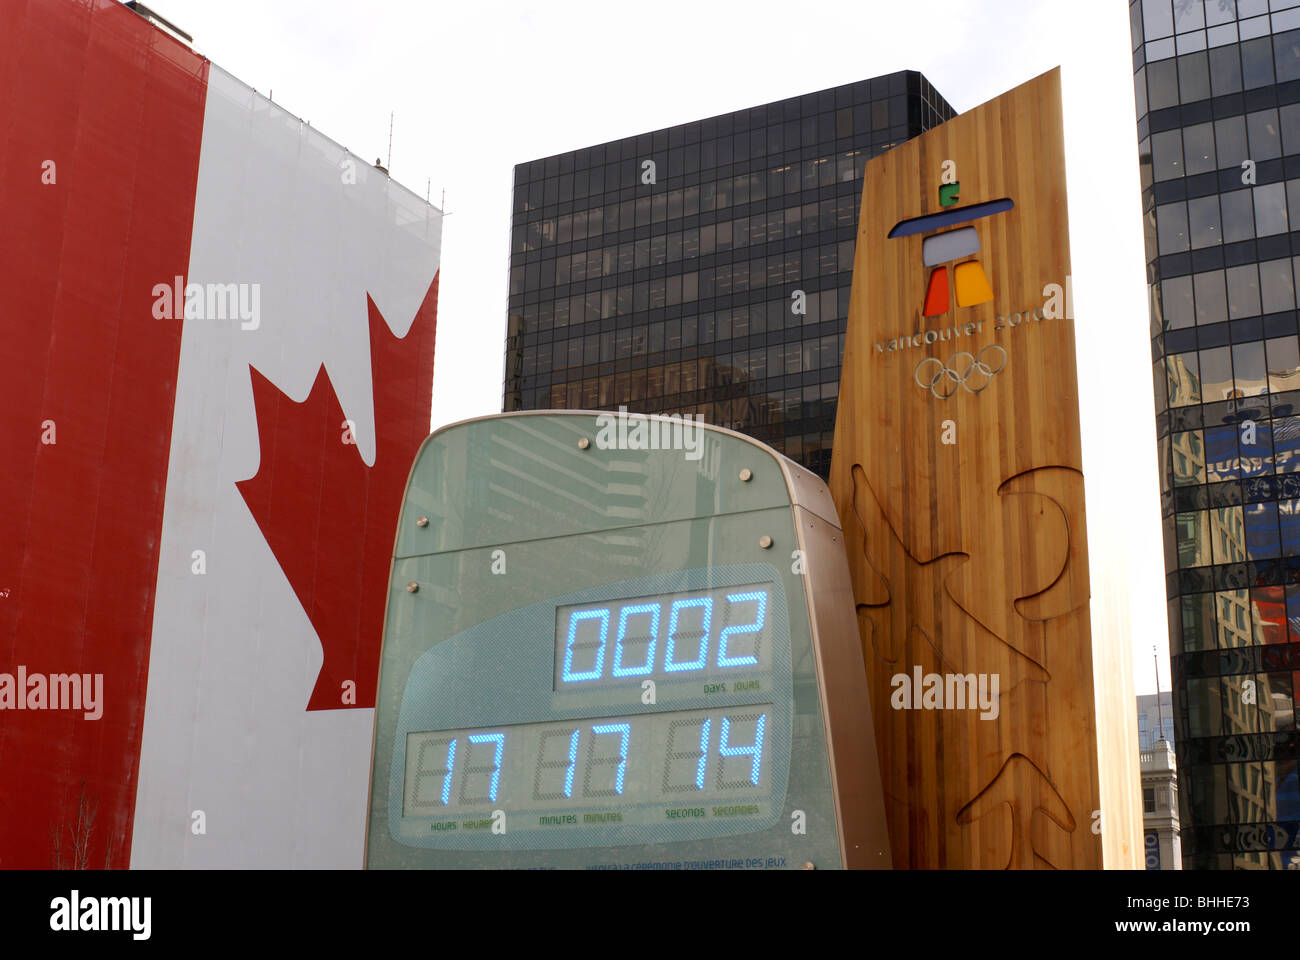 The official Olympic clock for the 2010 Winter Games, Vancouver, British Columbia Canada. Stock Photo